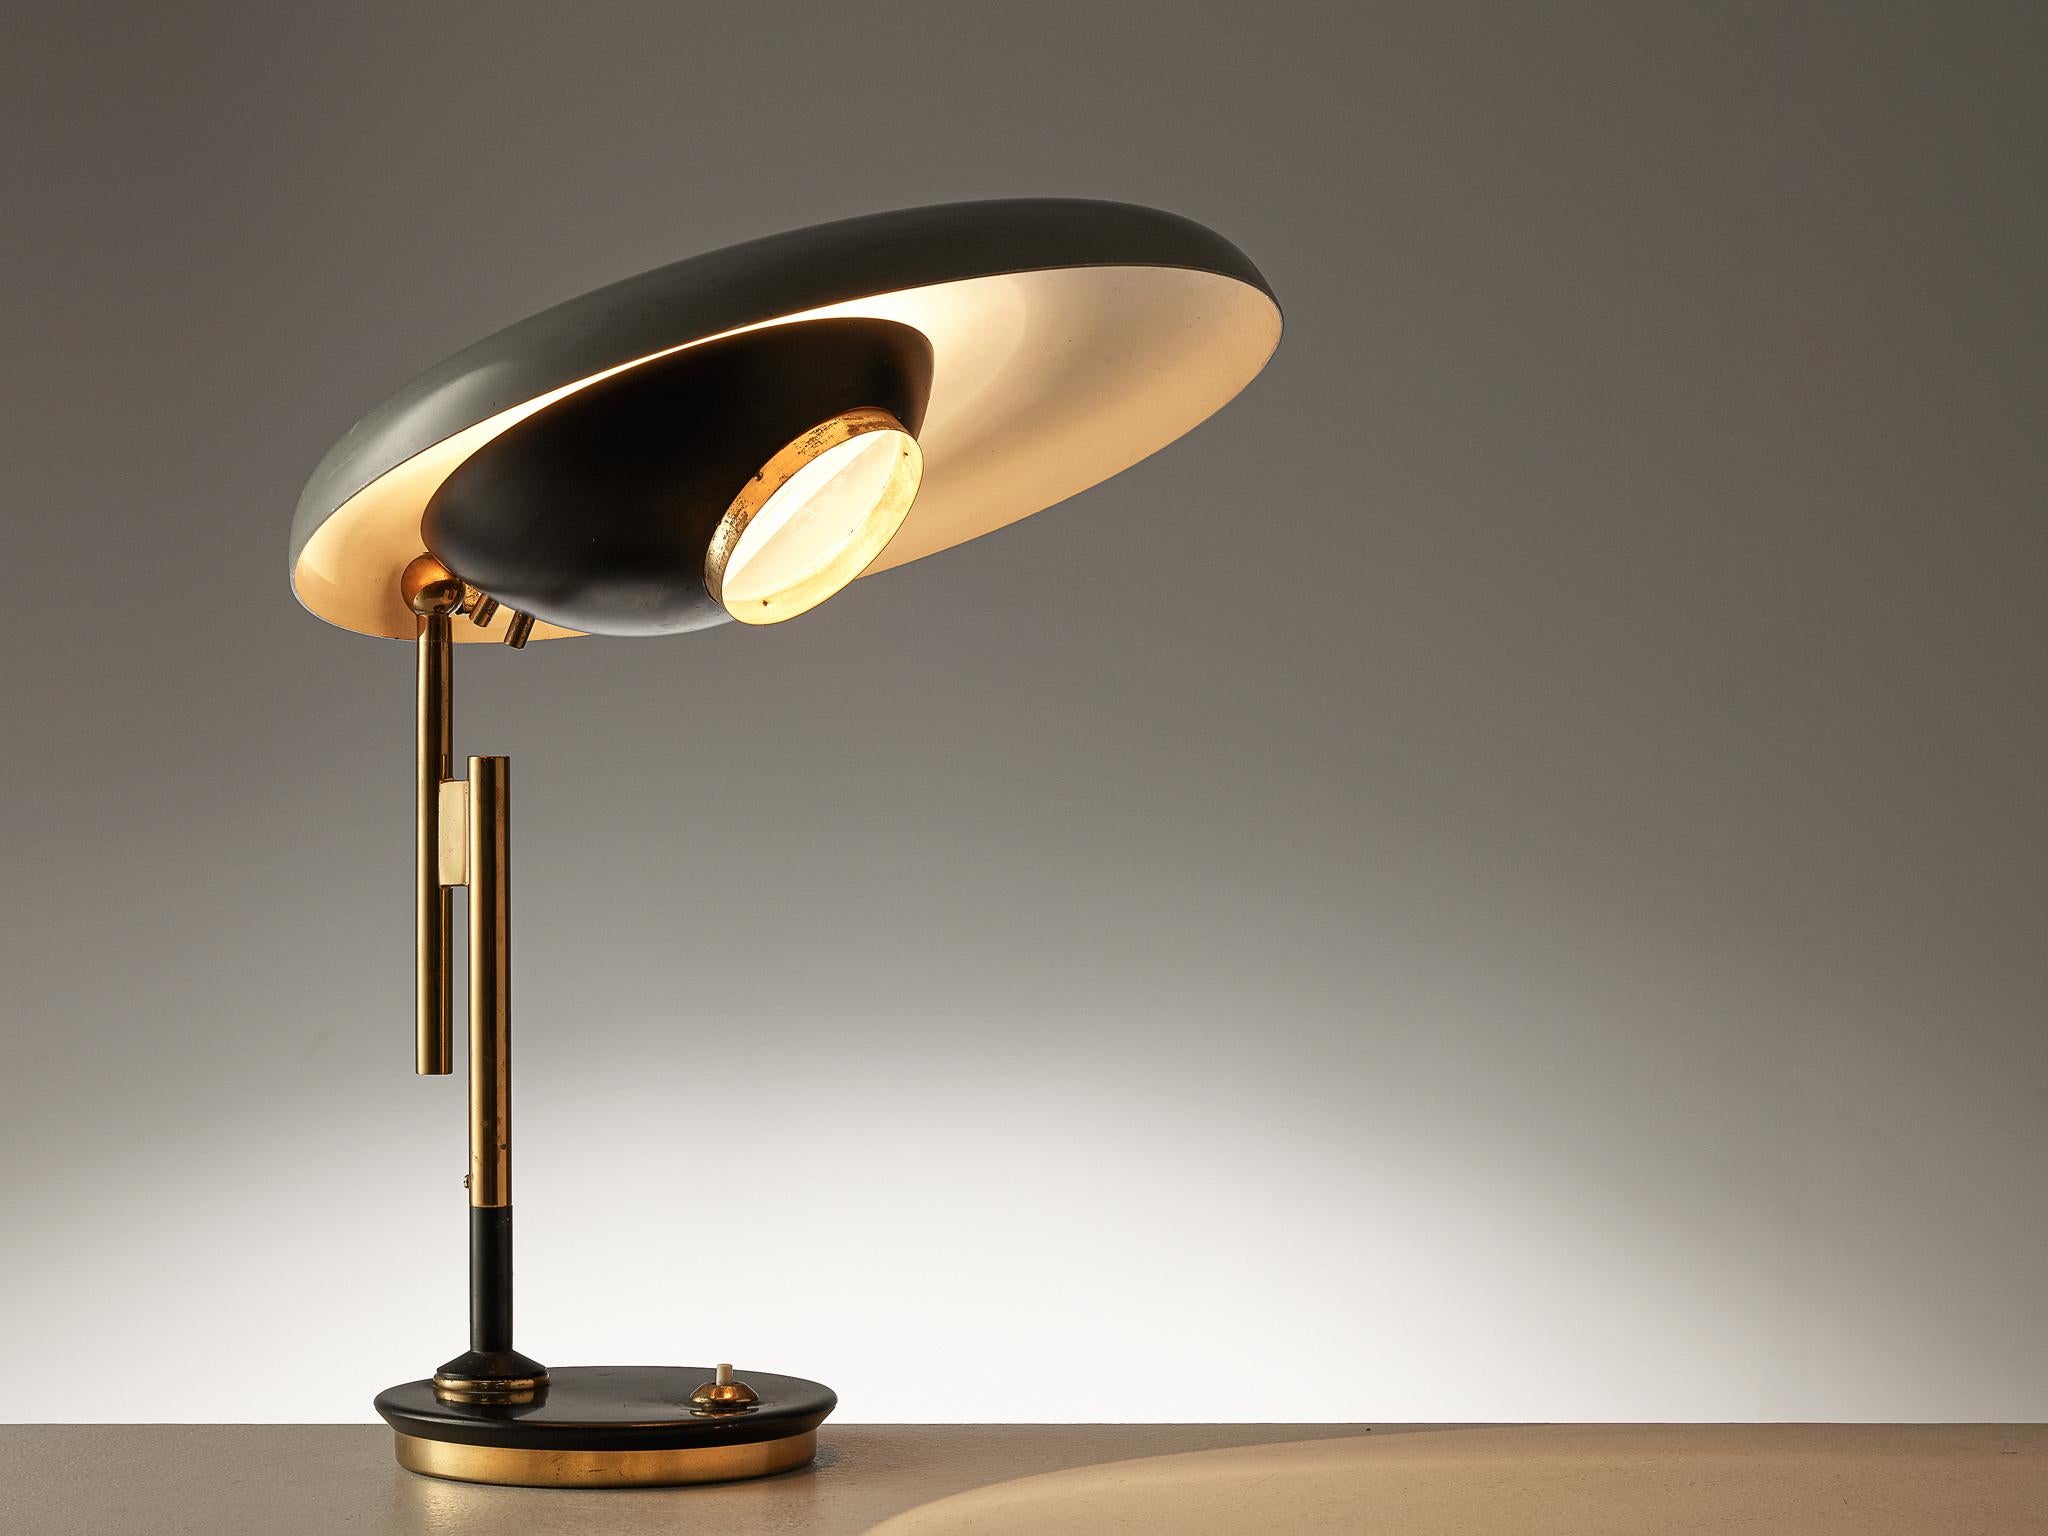 Oscar Torlasco for Lumi, table lamp model '555', metal, brass, Italy, 1950s

Refined desk light by Italian designer Oscar Torlasco. The light consists of a round base in black coated metal with a bottom in brass. The stem consists of two staggered